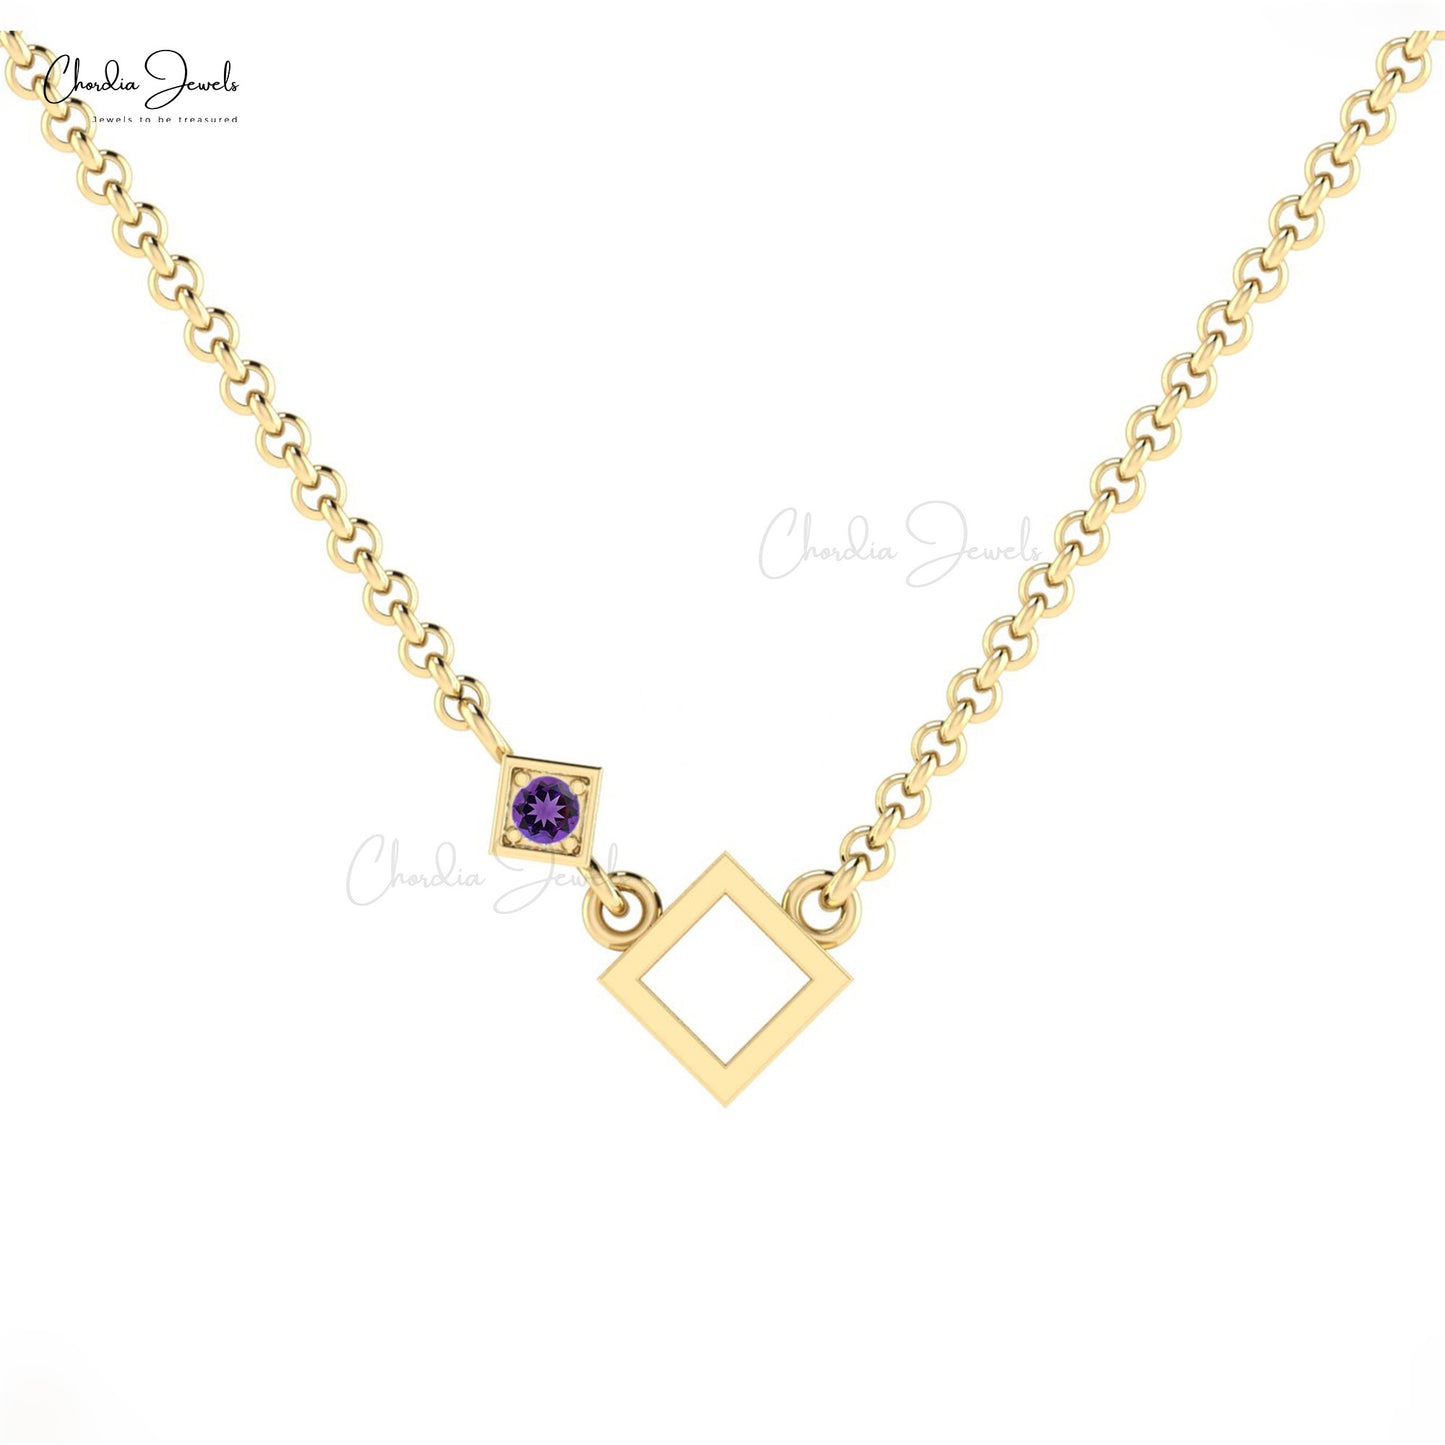 Beautiful Attractive Open Square Gemstone Accented Necklace Pendant Authentic Purple Amethyst Necklace 14k Solid Gold Jewelry For Gift